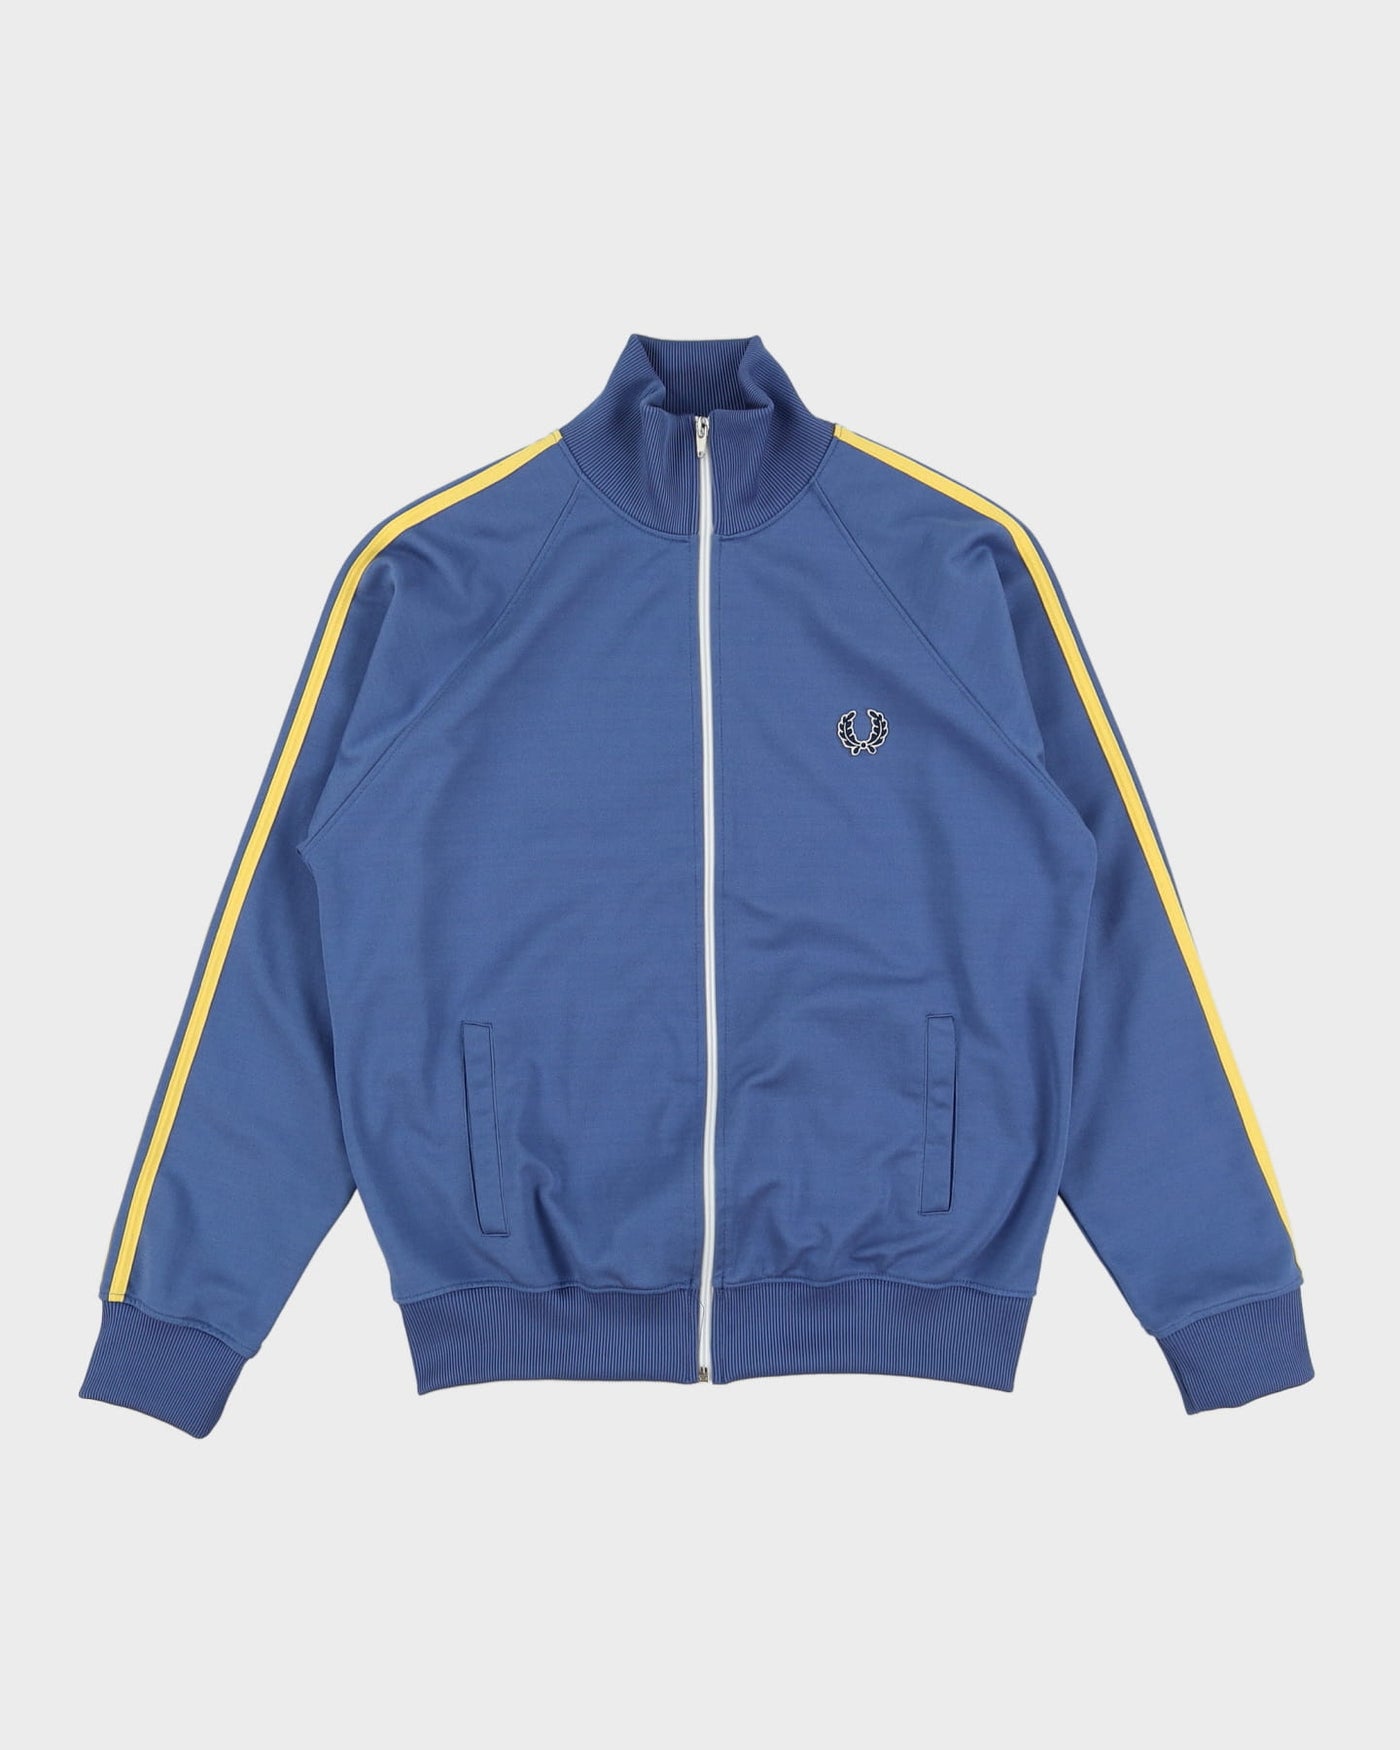 Vintage 90s Fred Perry Blue / Yellow Striped Track Jacket - M